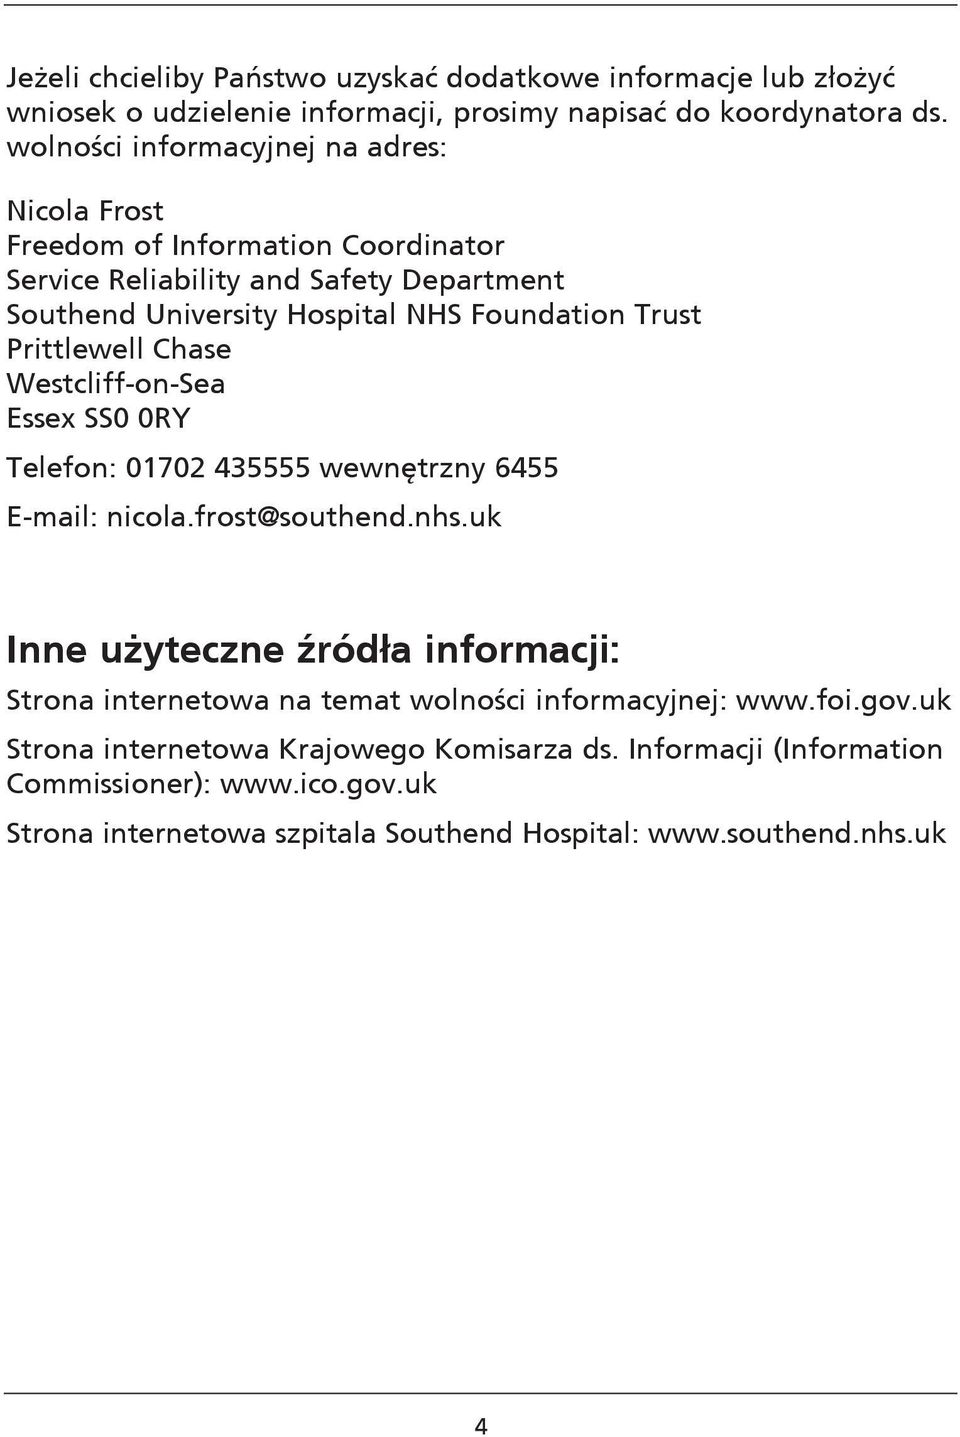 Prittlewell Chase Westcliff-on-Sea Essex SS0 0RY Telefon: 01702 435555 wewnętrzny 6455 E-mail: nicola.frost@southend.nhs.